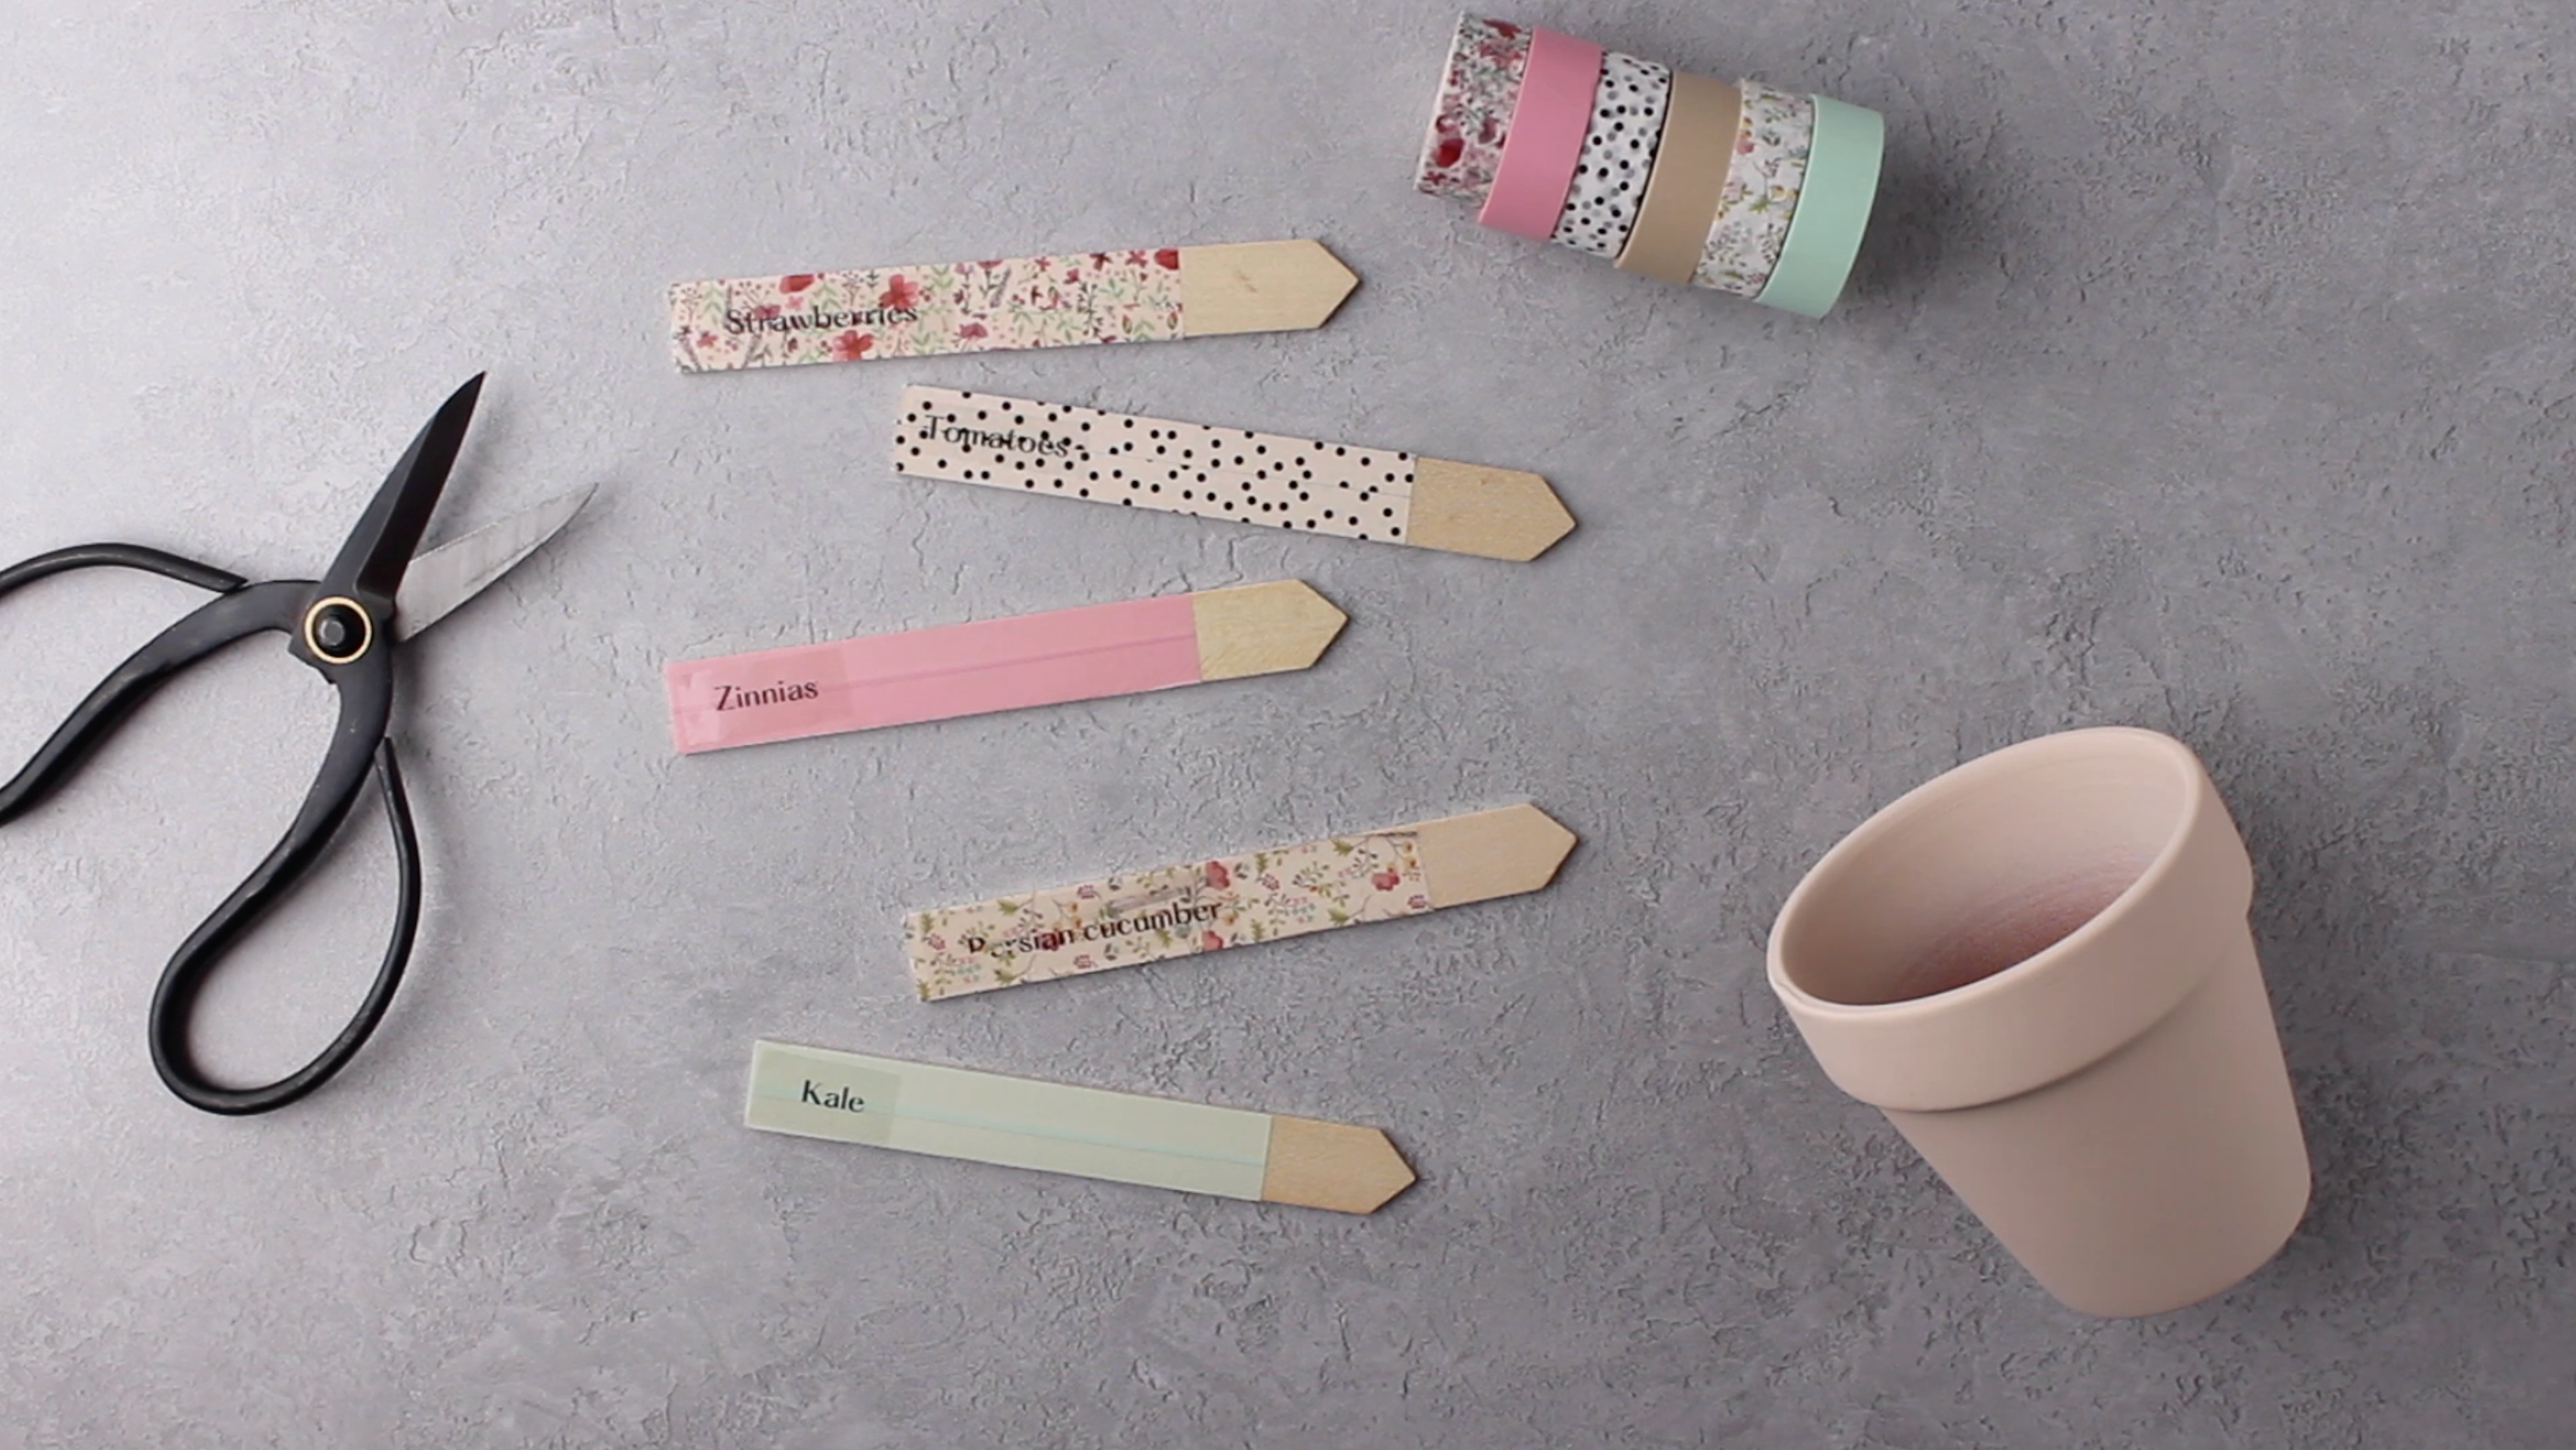 DIY: Make Garden Markers with Washi Tape